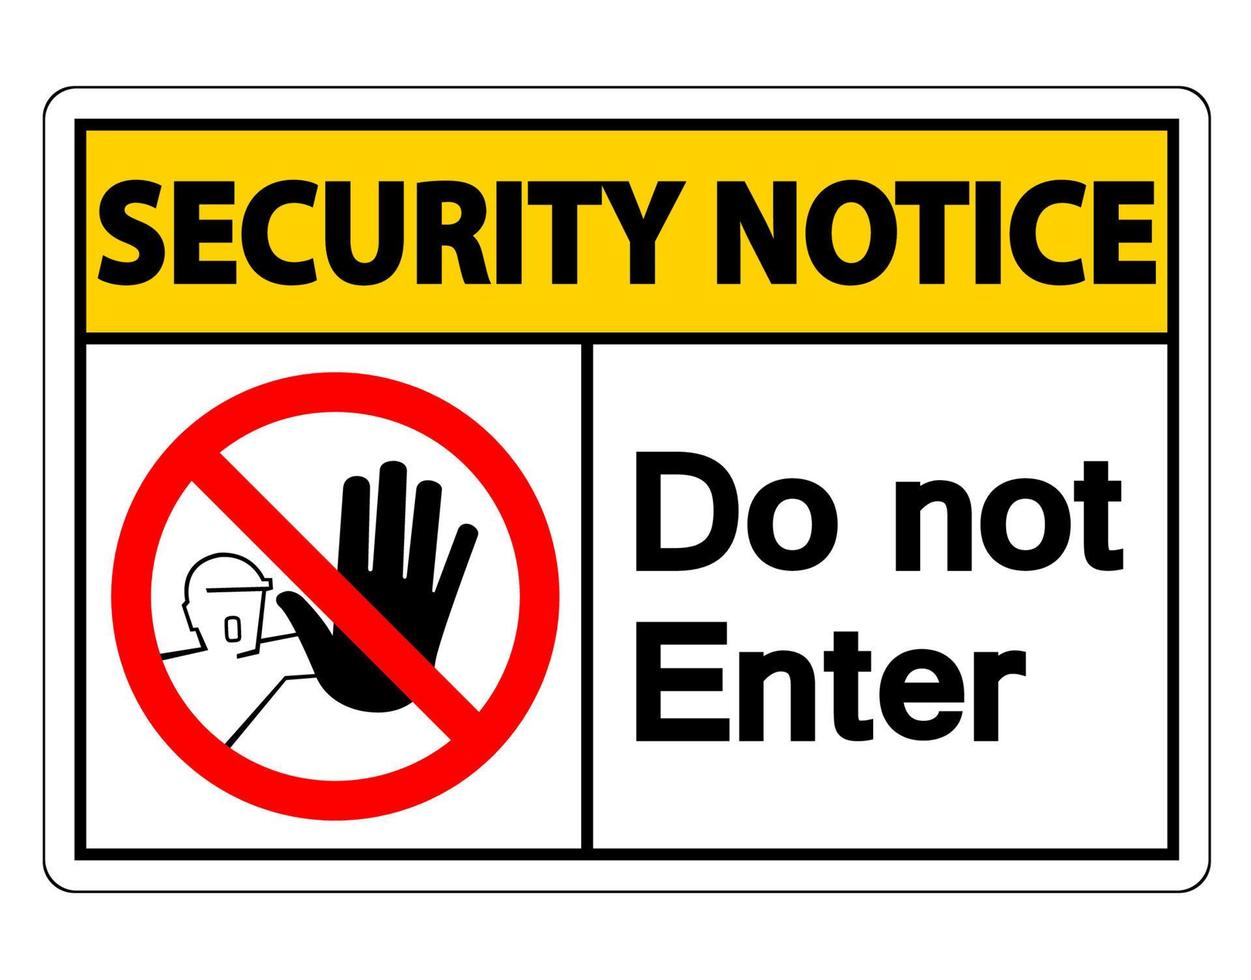 Security Notice Do Not Enter Symbol Sign on white background vector